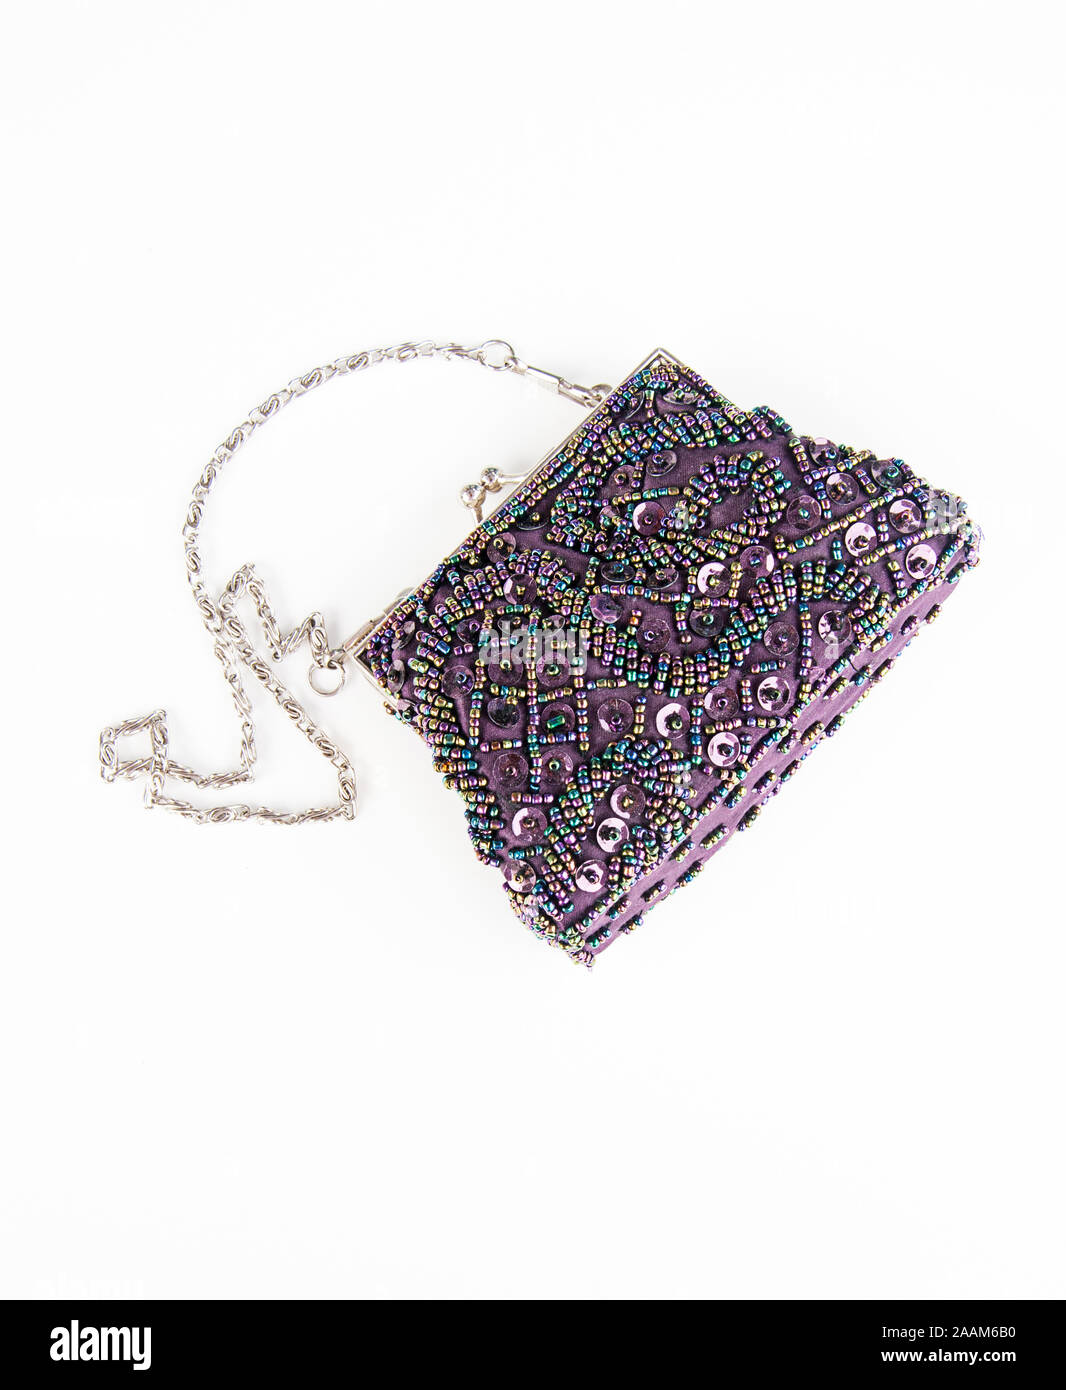 Purple beaded clutch purse fashion isolated on light background.  Silver chain strap with iridescent sequins and details.  Womens fashion accessory. Stock Photo